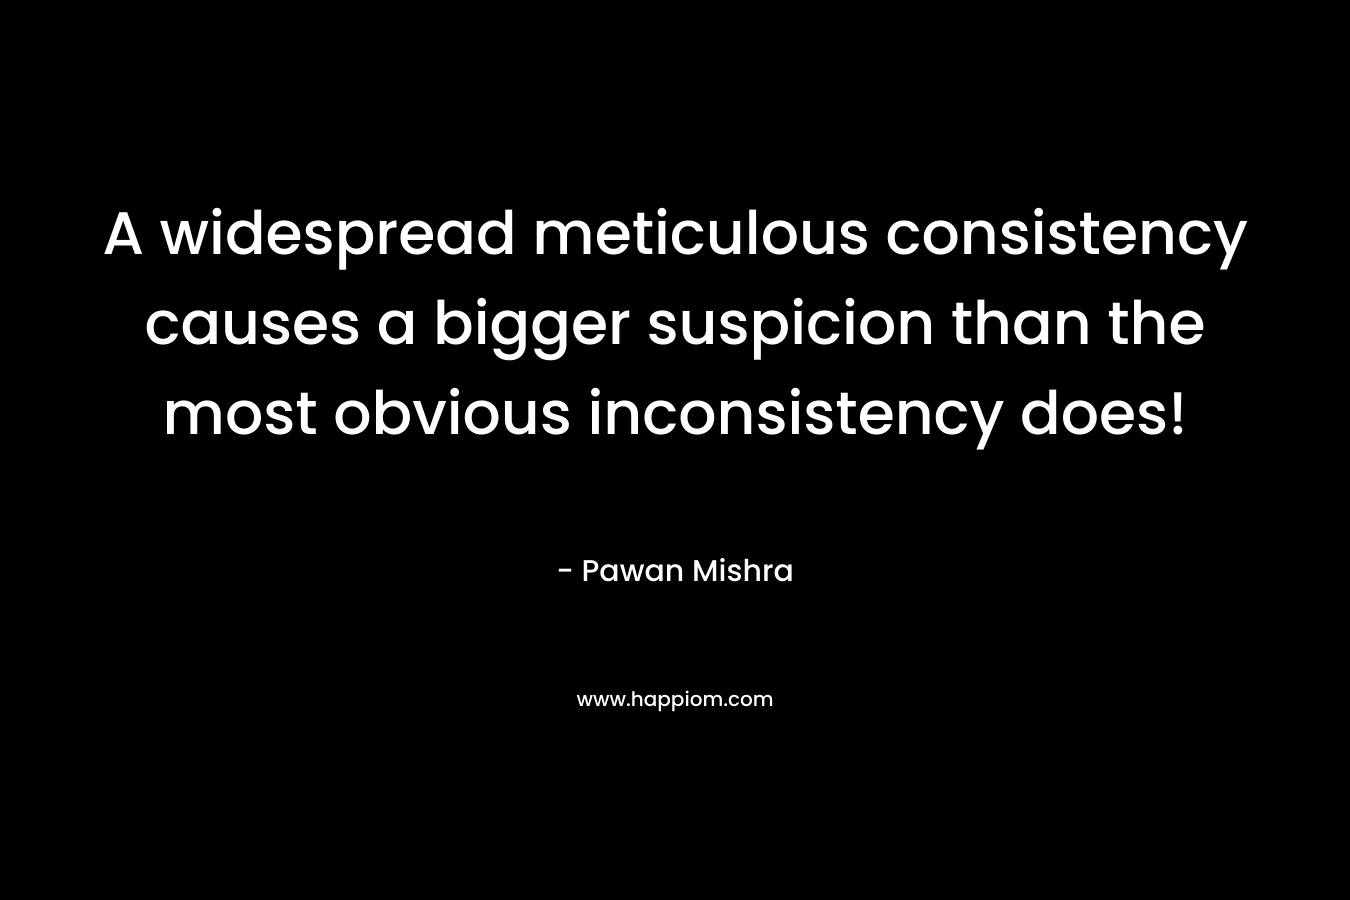 A widespread meticulous consistency causes a bigger suspicion than the most obvious inconsistency does! – Pawan Mishra